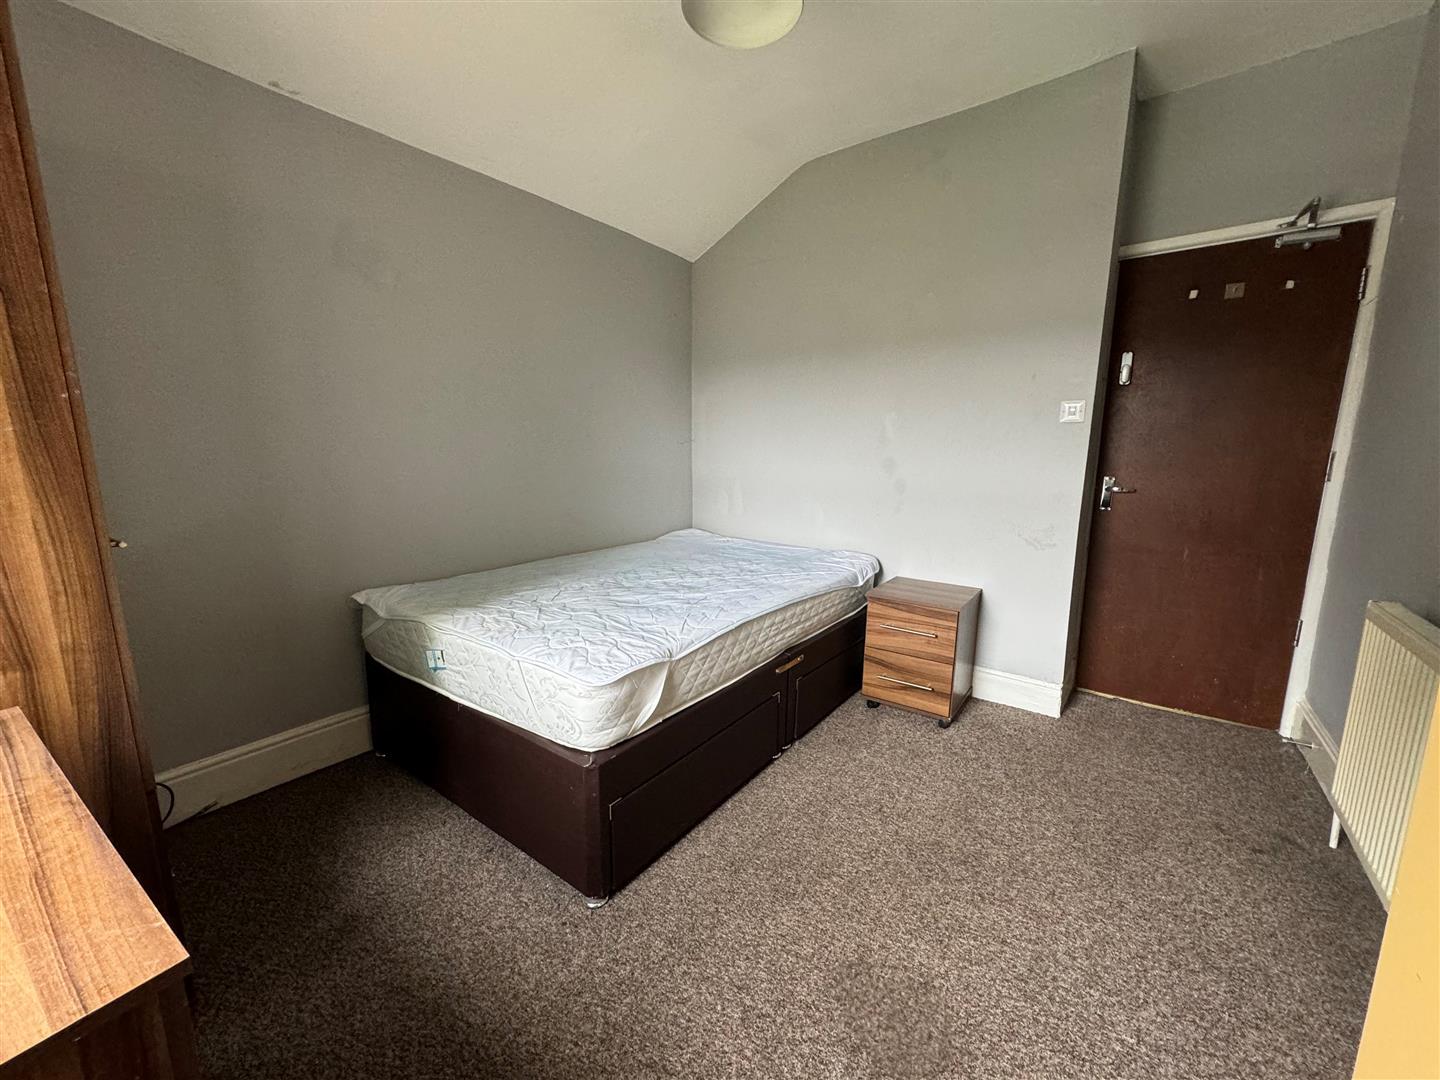 1 bed  to rent  - Property Image 2